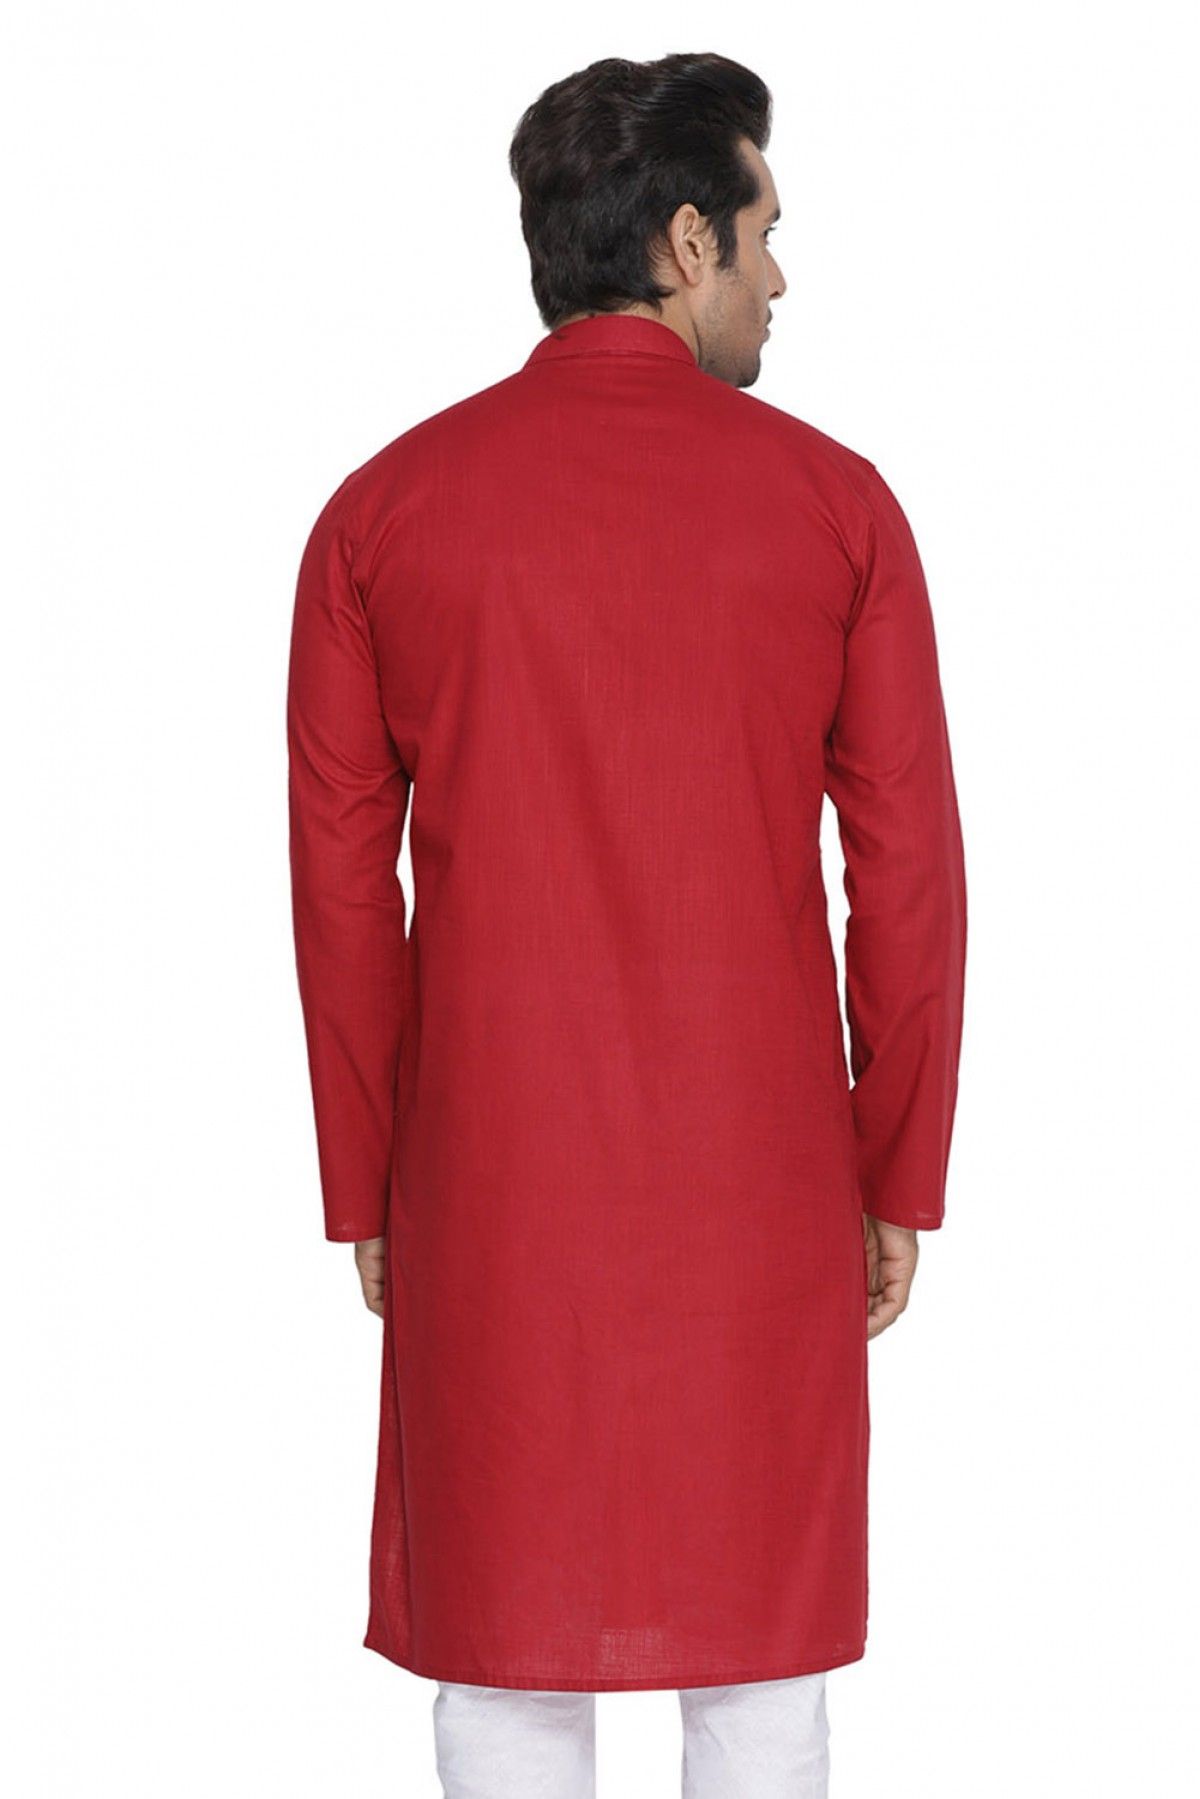 Cotton Party Wear Only Kurta In Maroon Colour